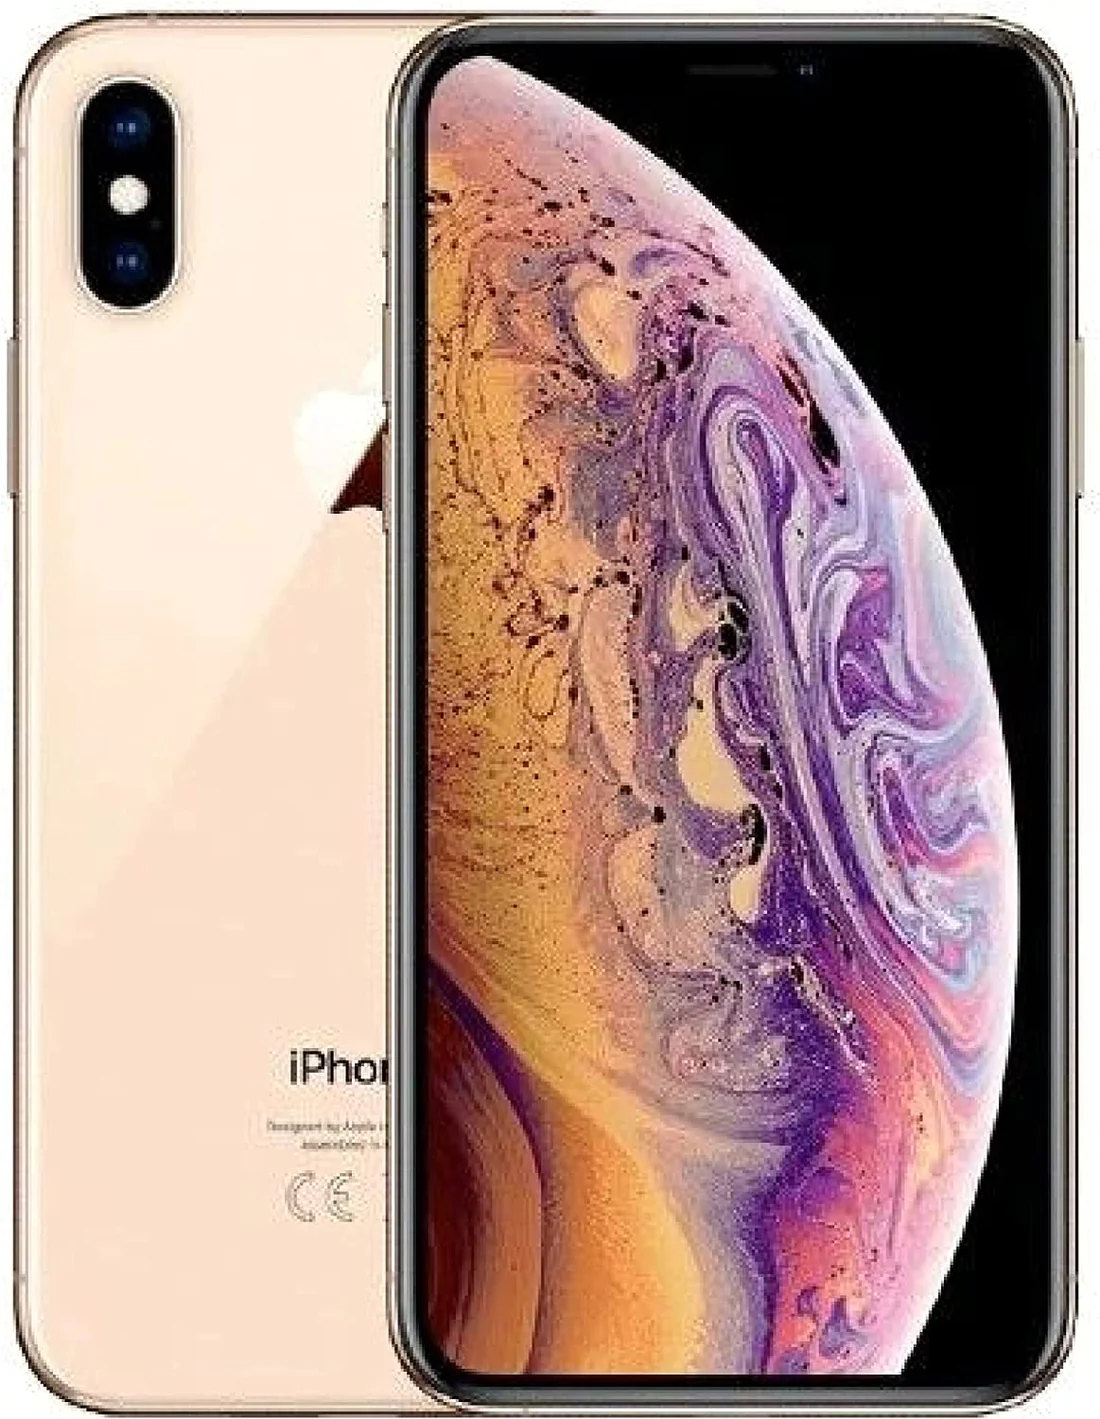 Apple iPhone XS Max With Facetime - All Colours - Refurbished